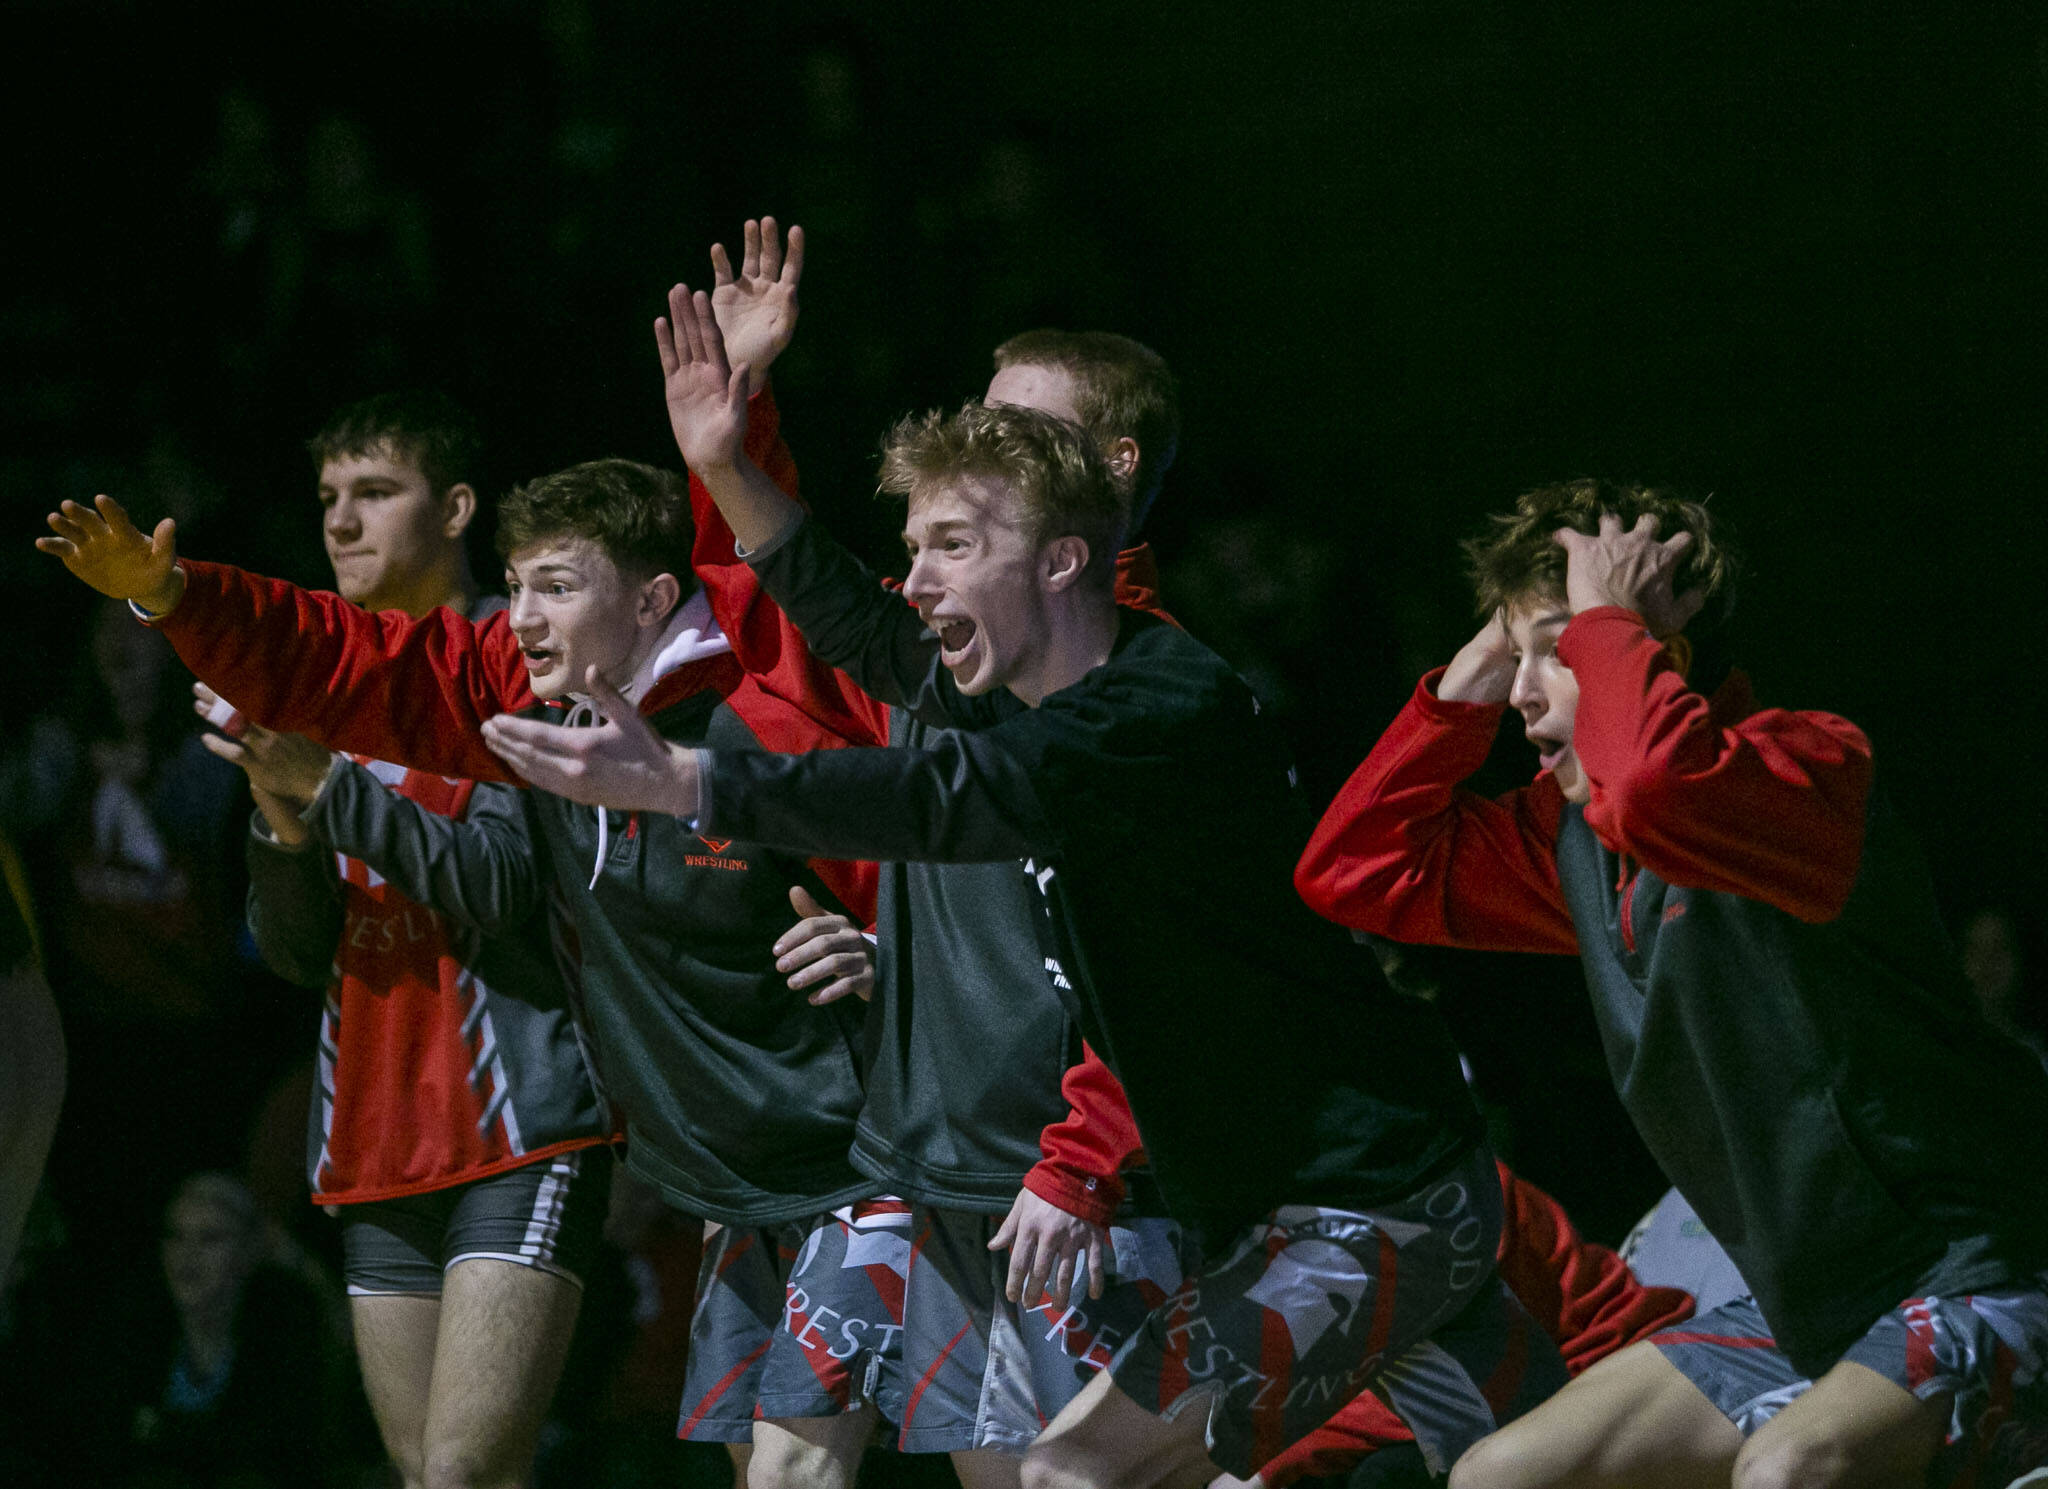 Stanwood wrestlers react to a pin during a match against Arlington on Jan. 24 in Arlington. The Stanwood boys wrestling team placed third at state in Class 3A. (Olivia Vanni / The Herald)